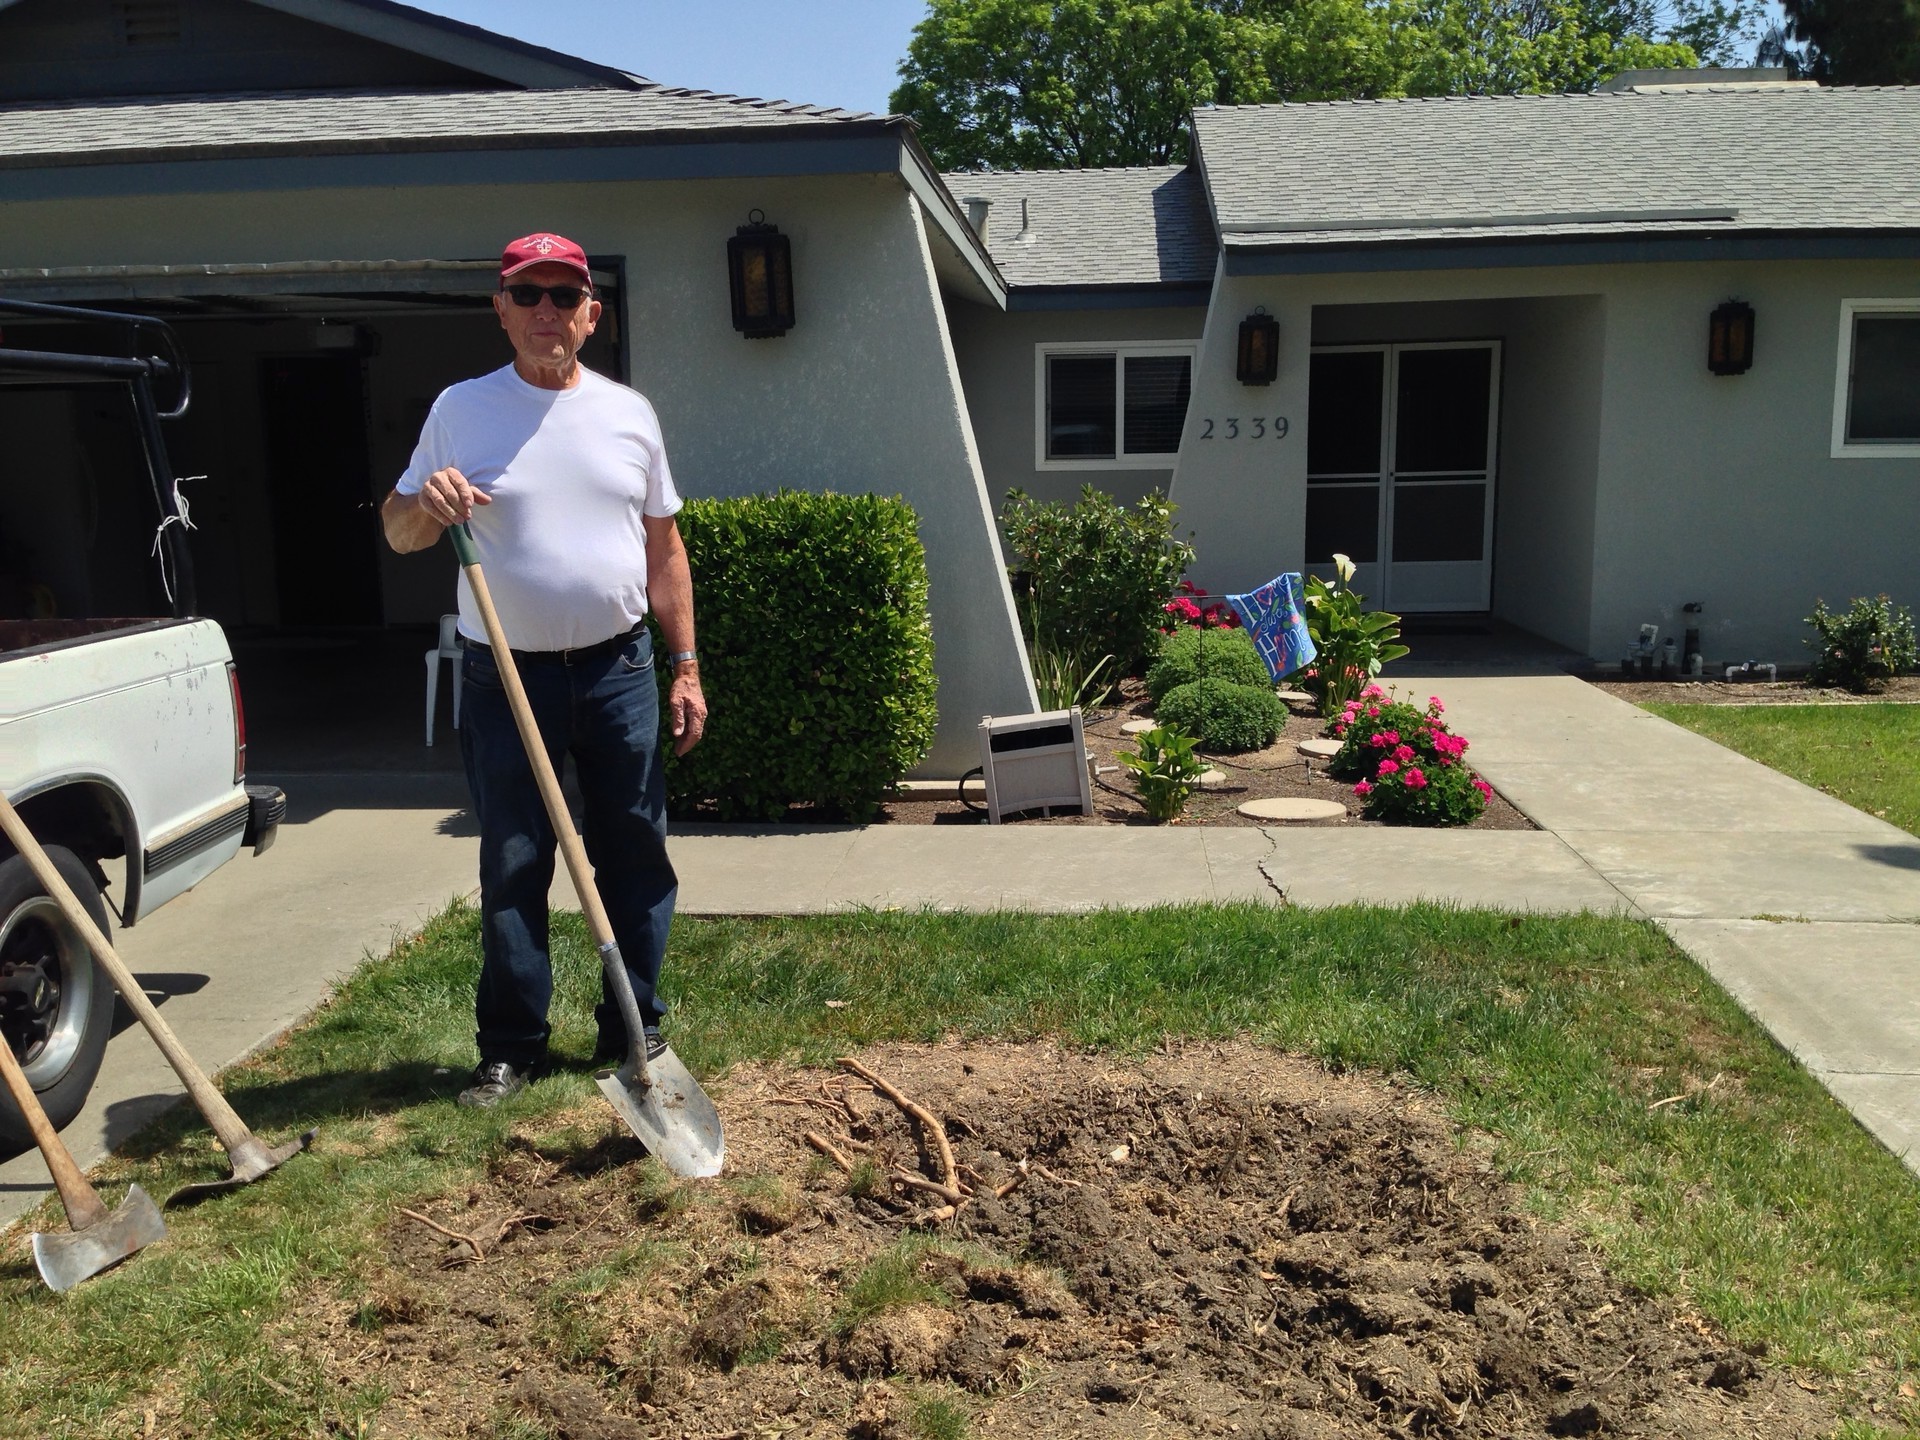 Tim Atkinson is tearing up his lawn in Hanford, which will save water but violate local landscape codes. (Sasha Khokha/KQED)